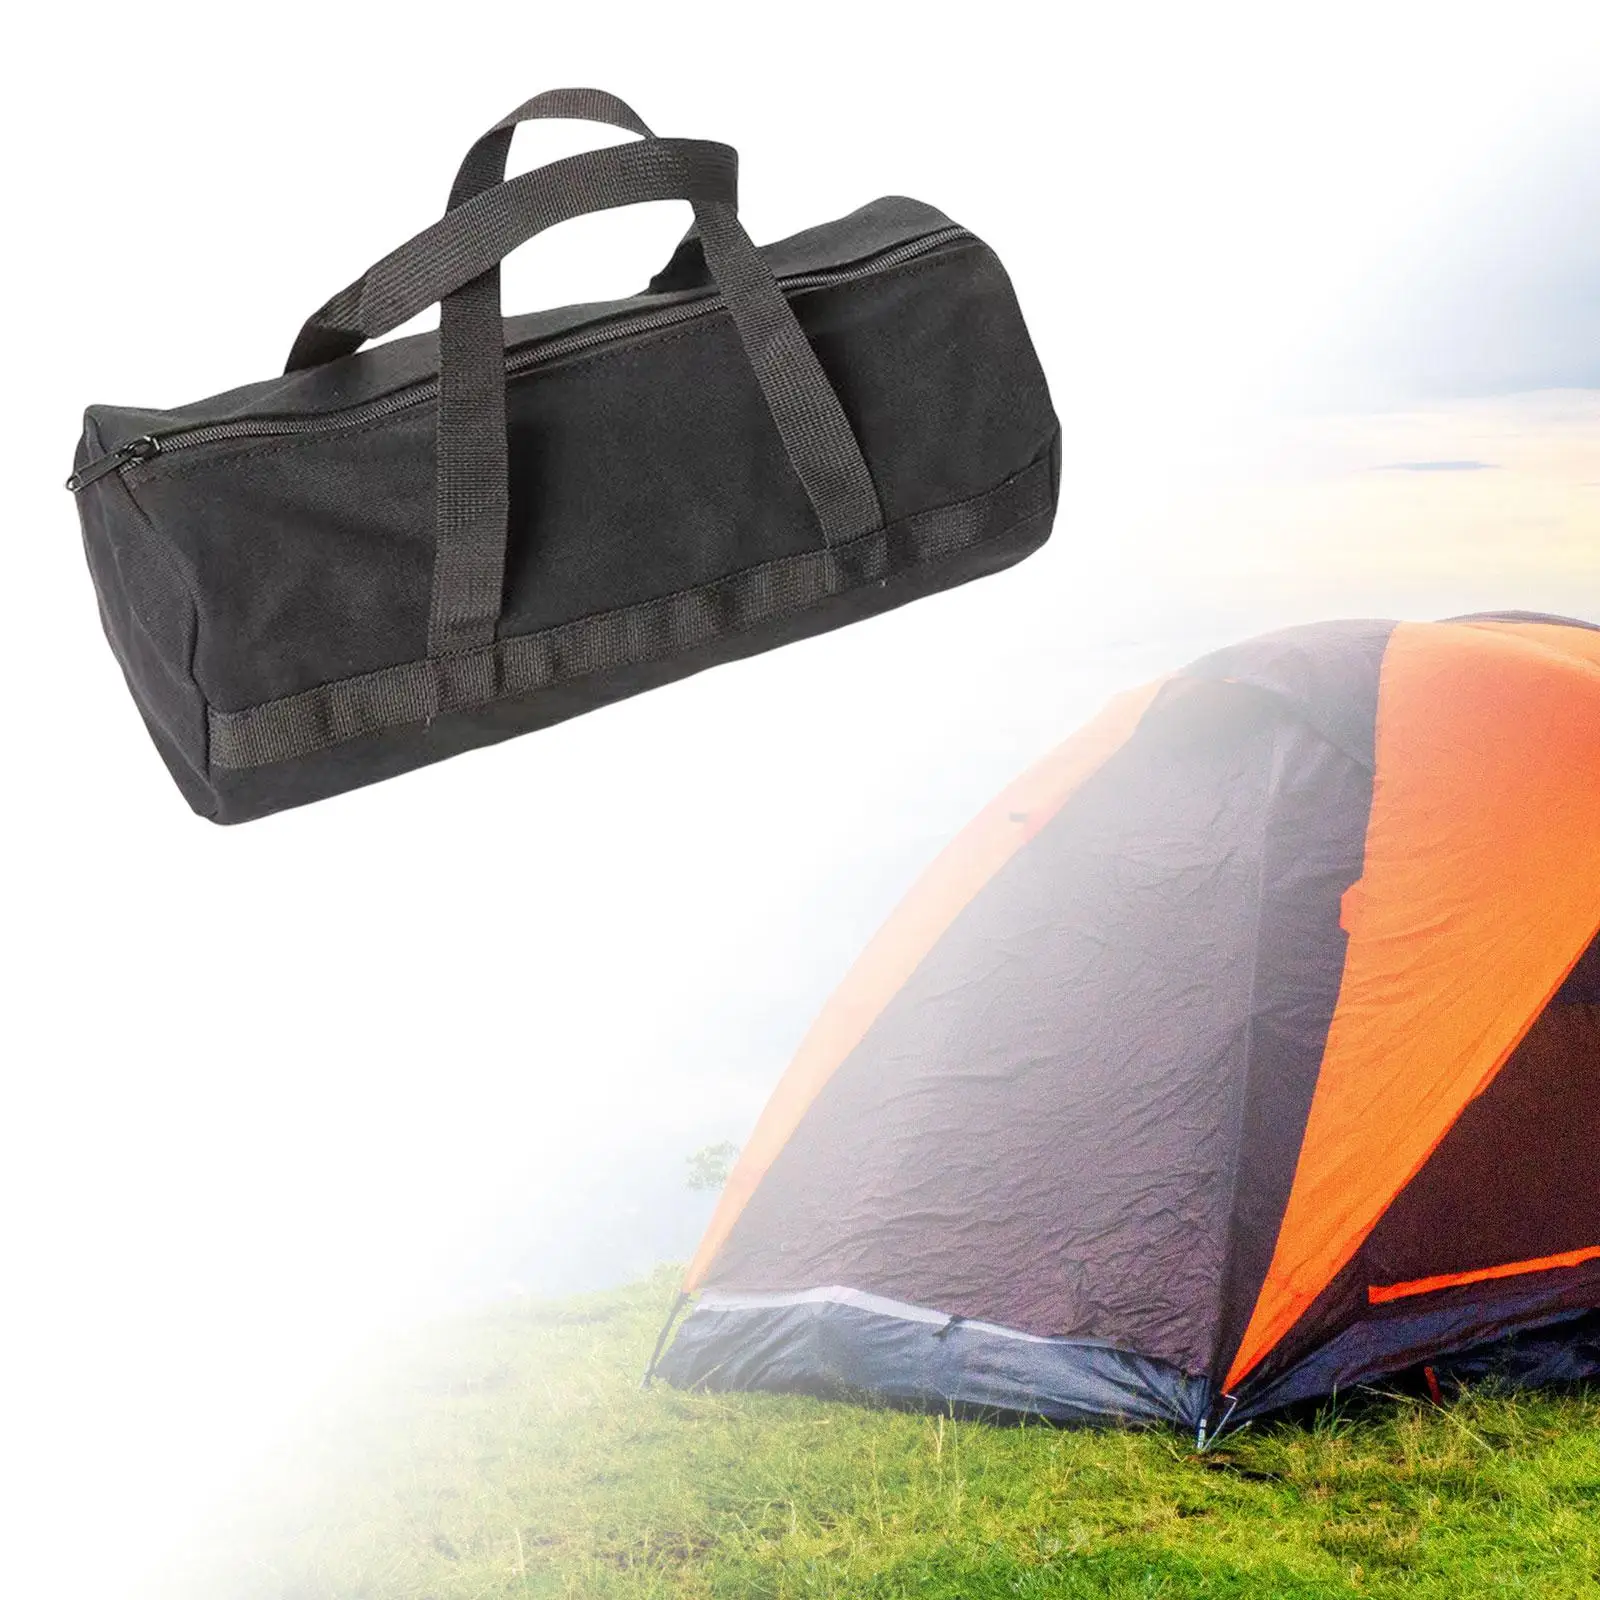 Tent Stakes Storage Bag Canvas Large Capacity Bags for Camping Picnic Hiking